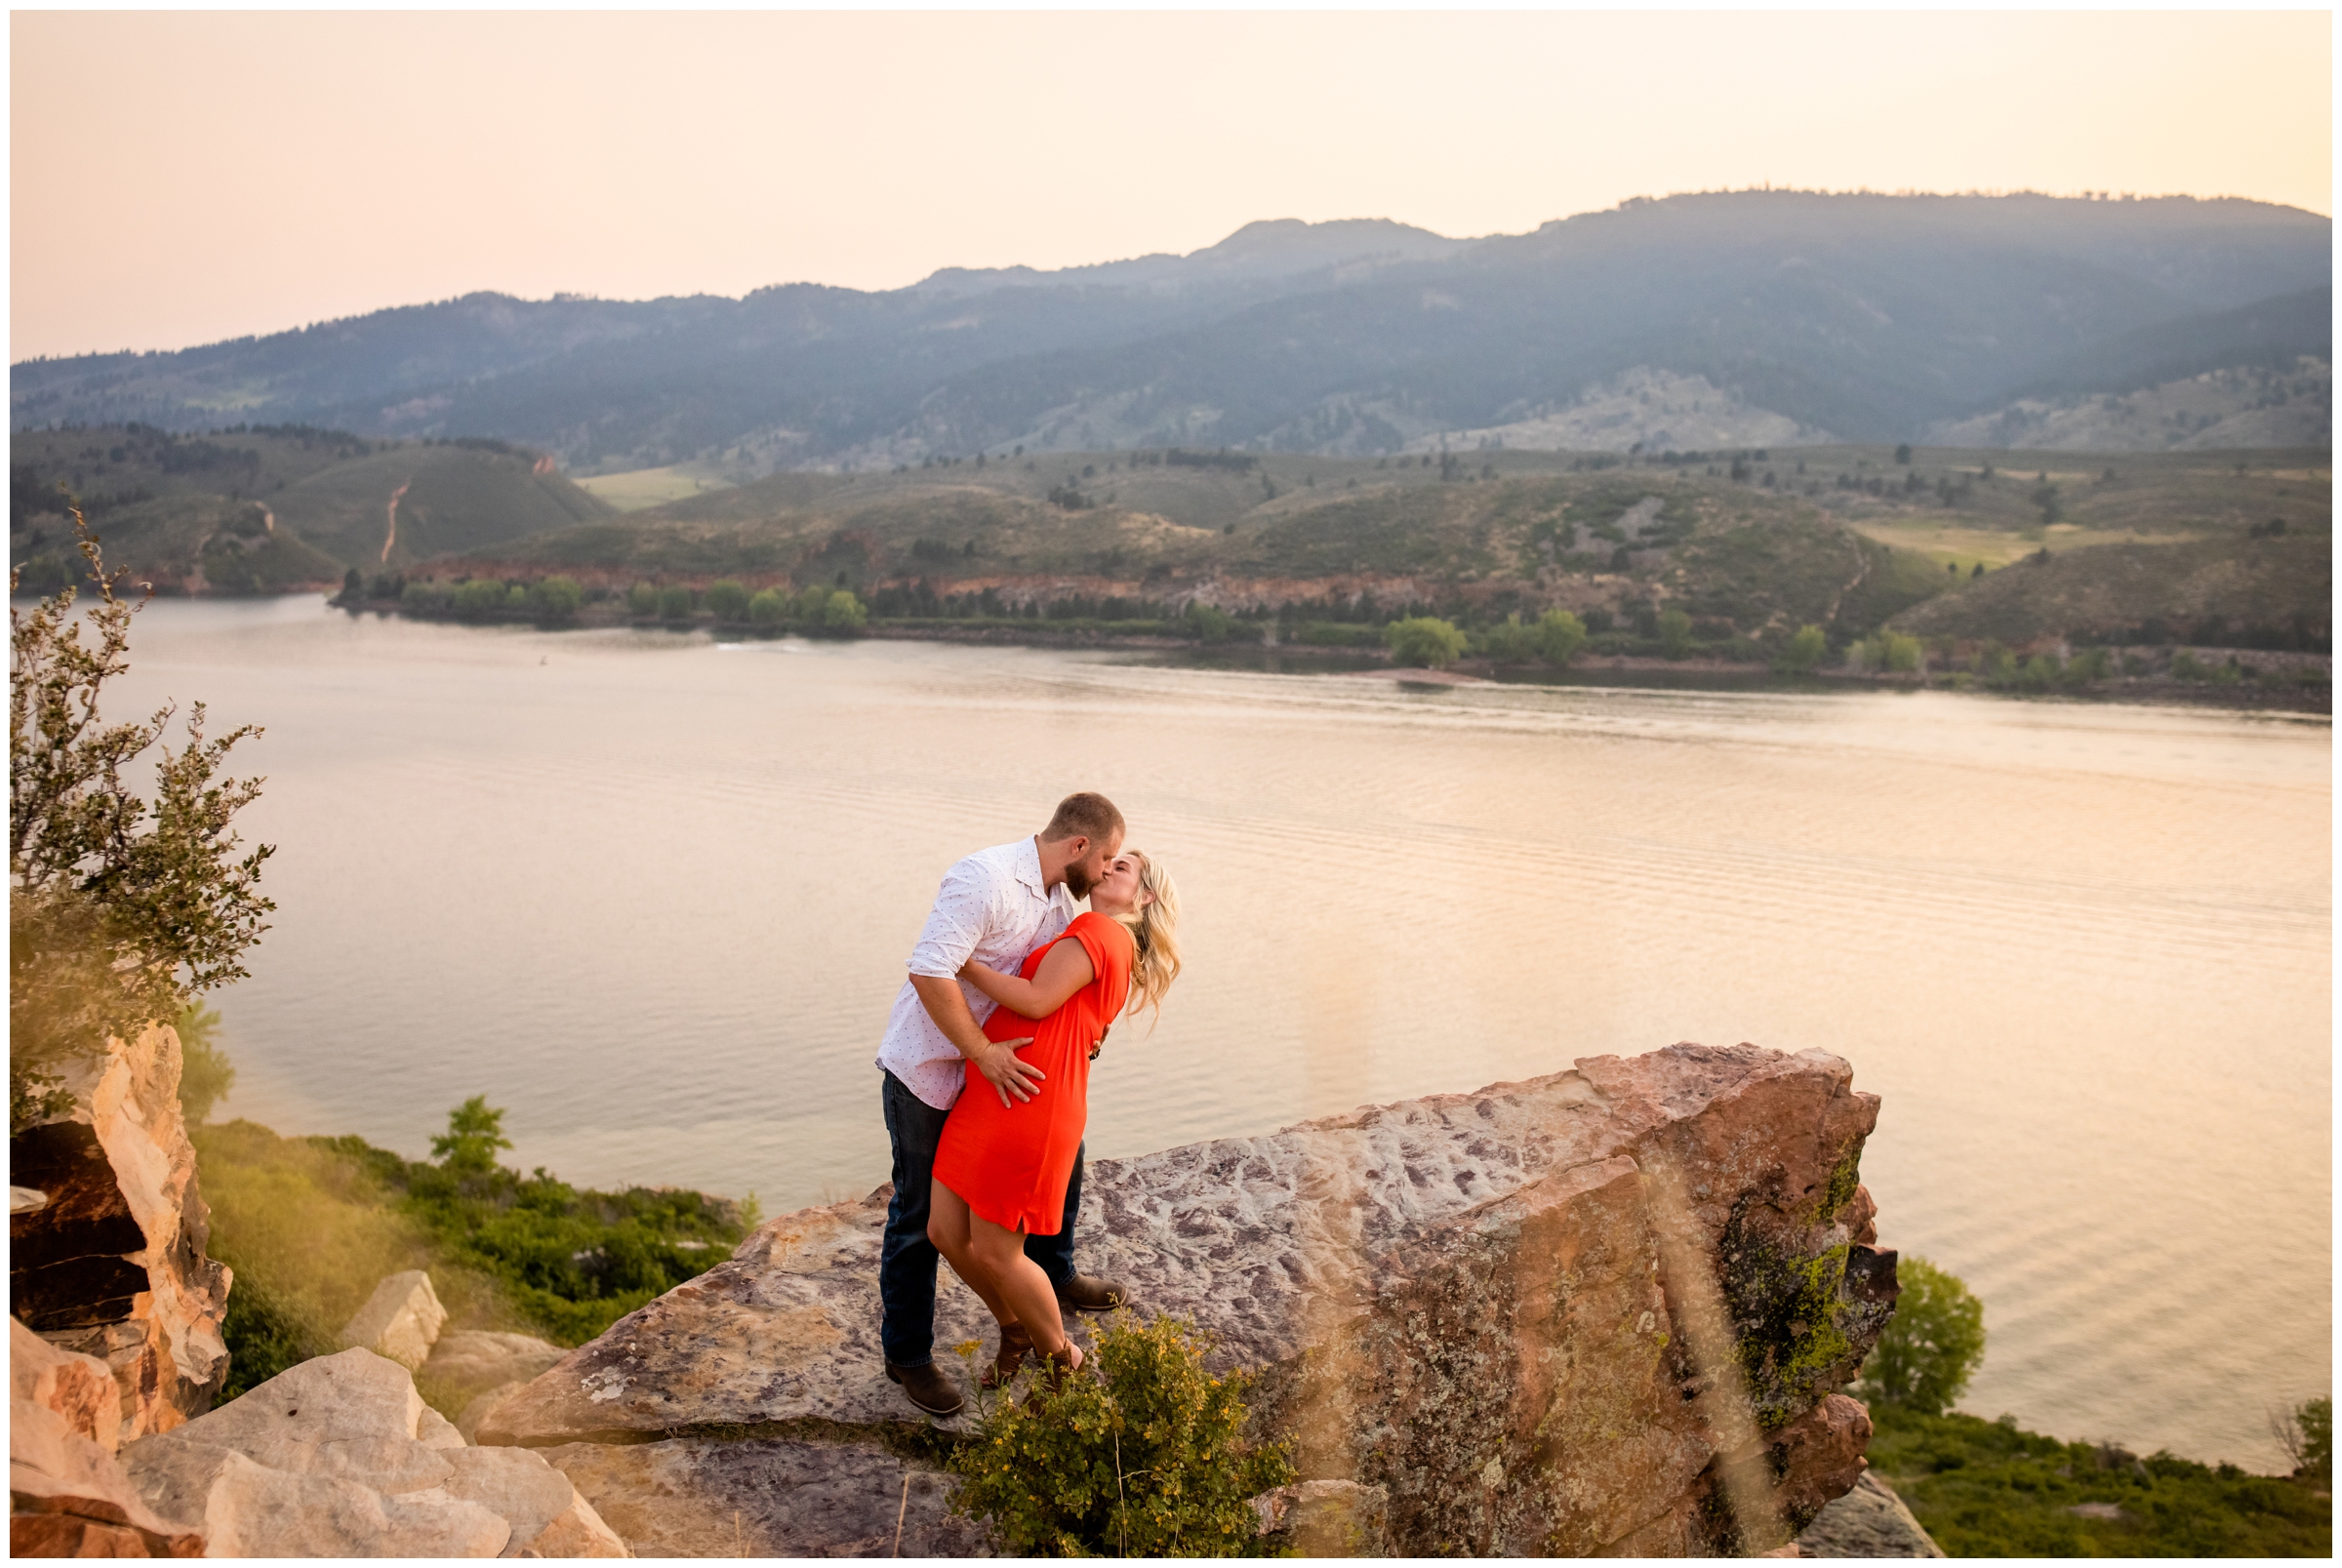 Colorado mountain lake engagement photography by Ft. Collins photographer Plum Pretty Photo